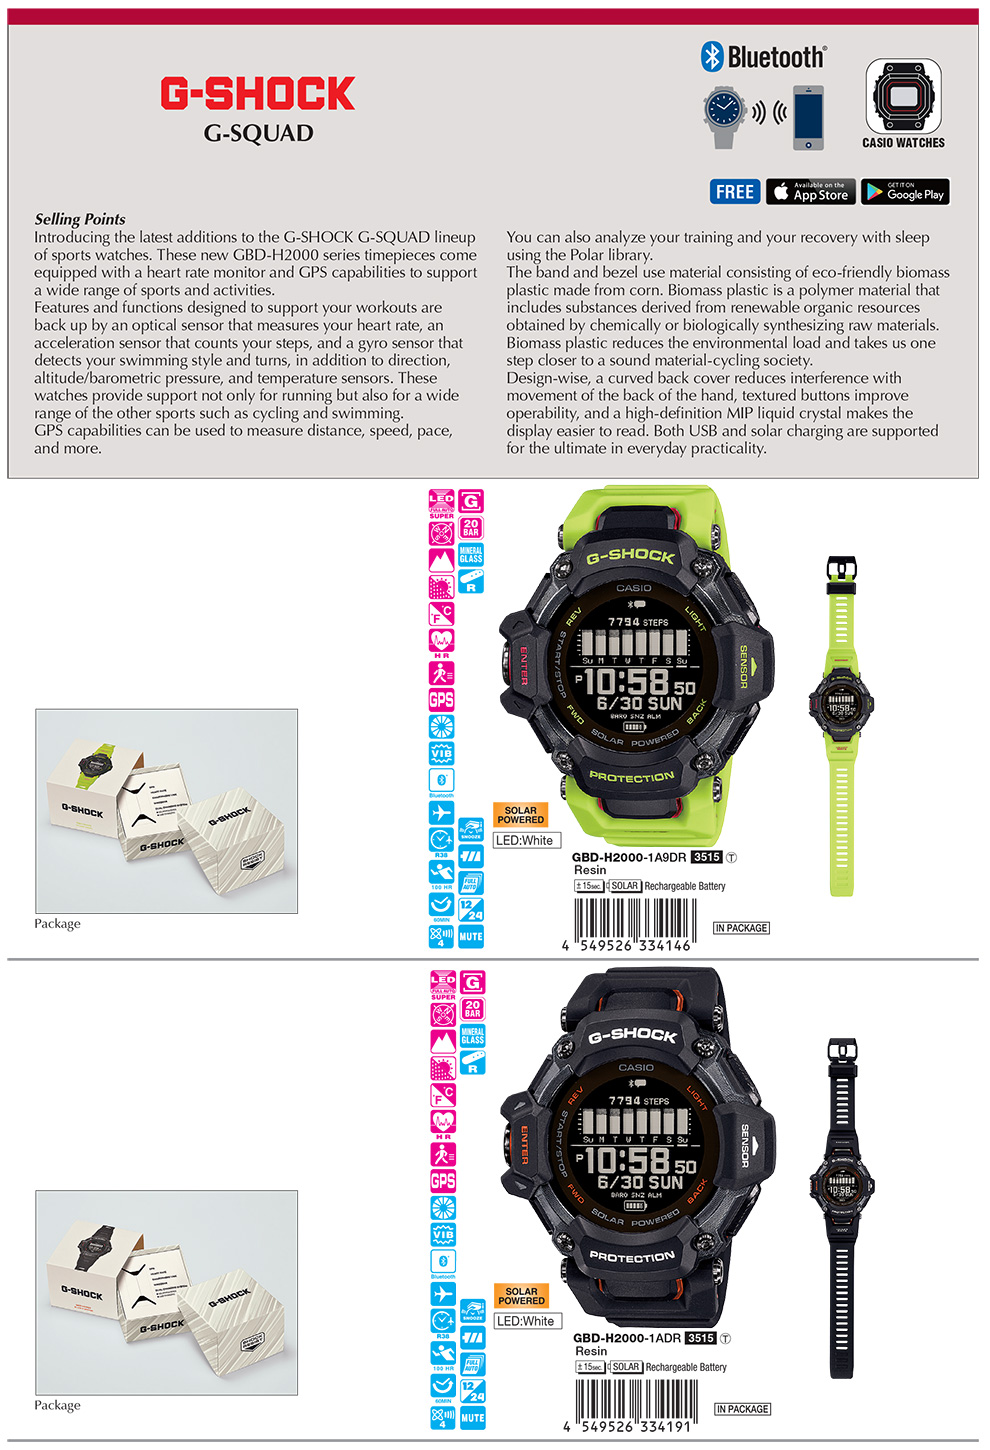 G-SHOCK, G-SQUAD, multi-sport, watches, heart rate monitor, GPS, USB Charger, solar, Polar, App integration, GBD-H2000-1A9, GBD-H2000-1A